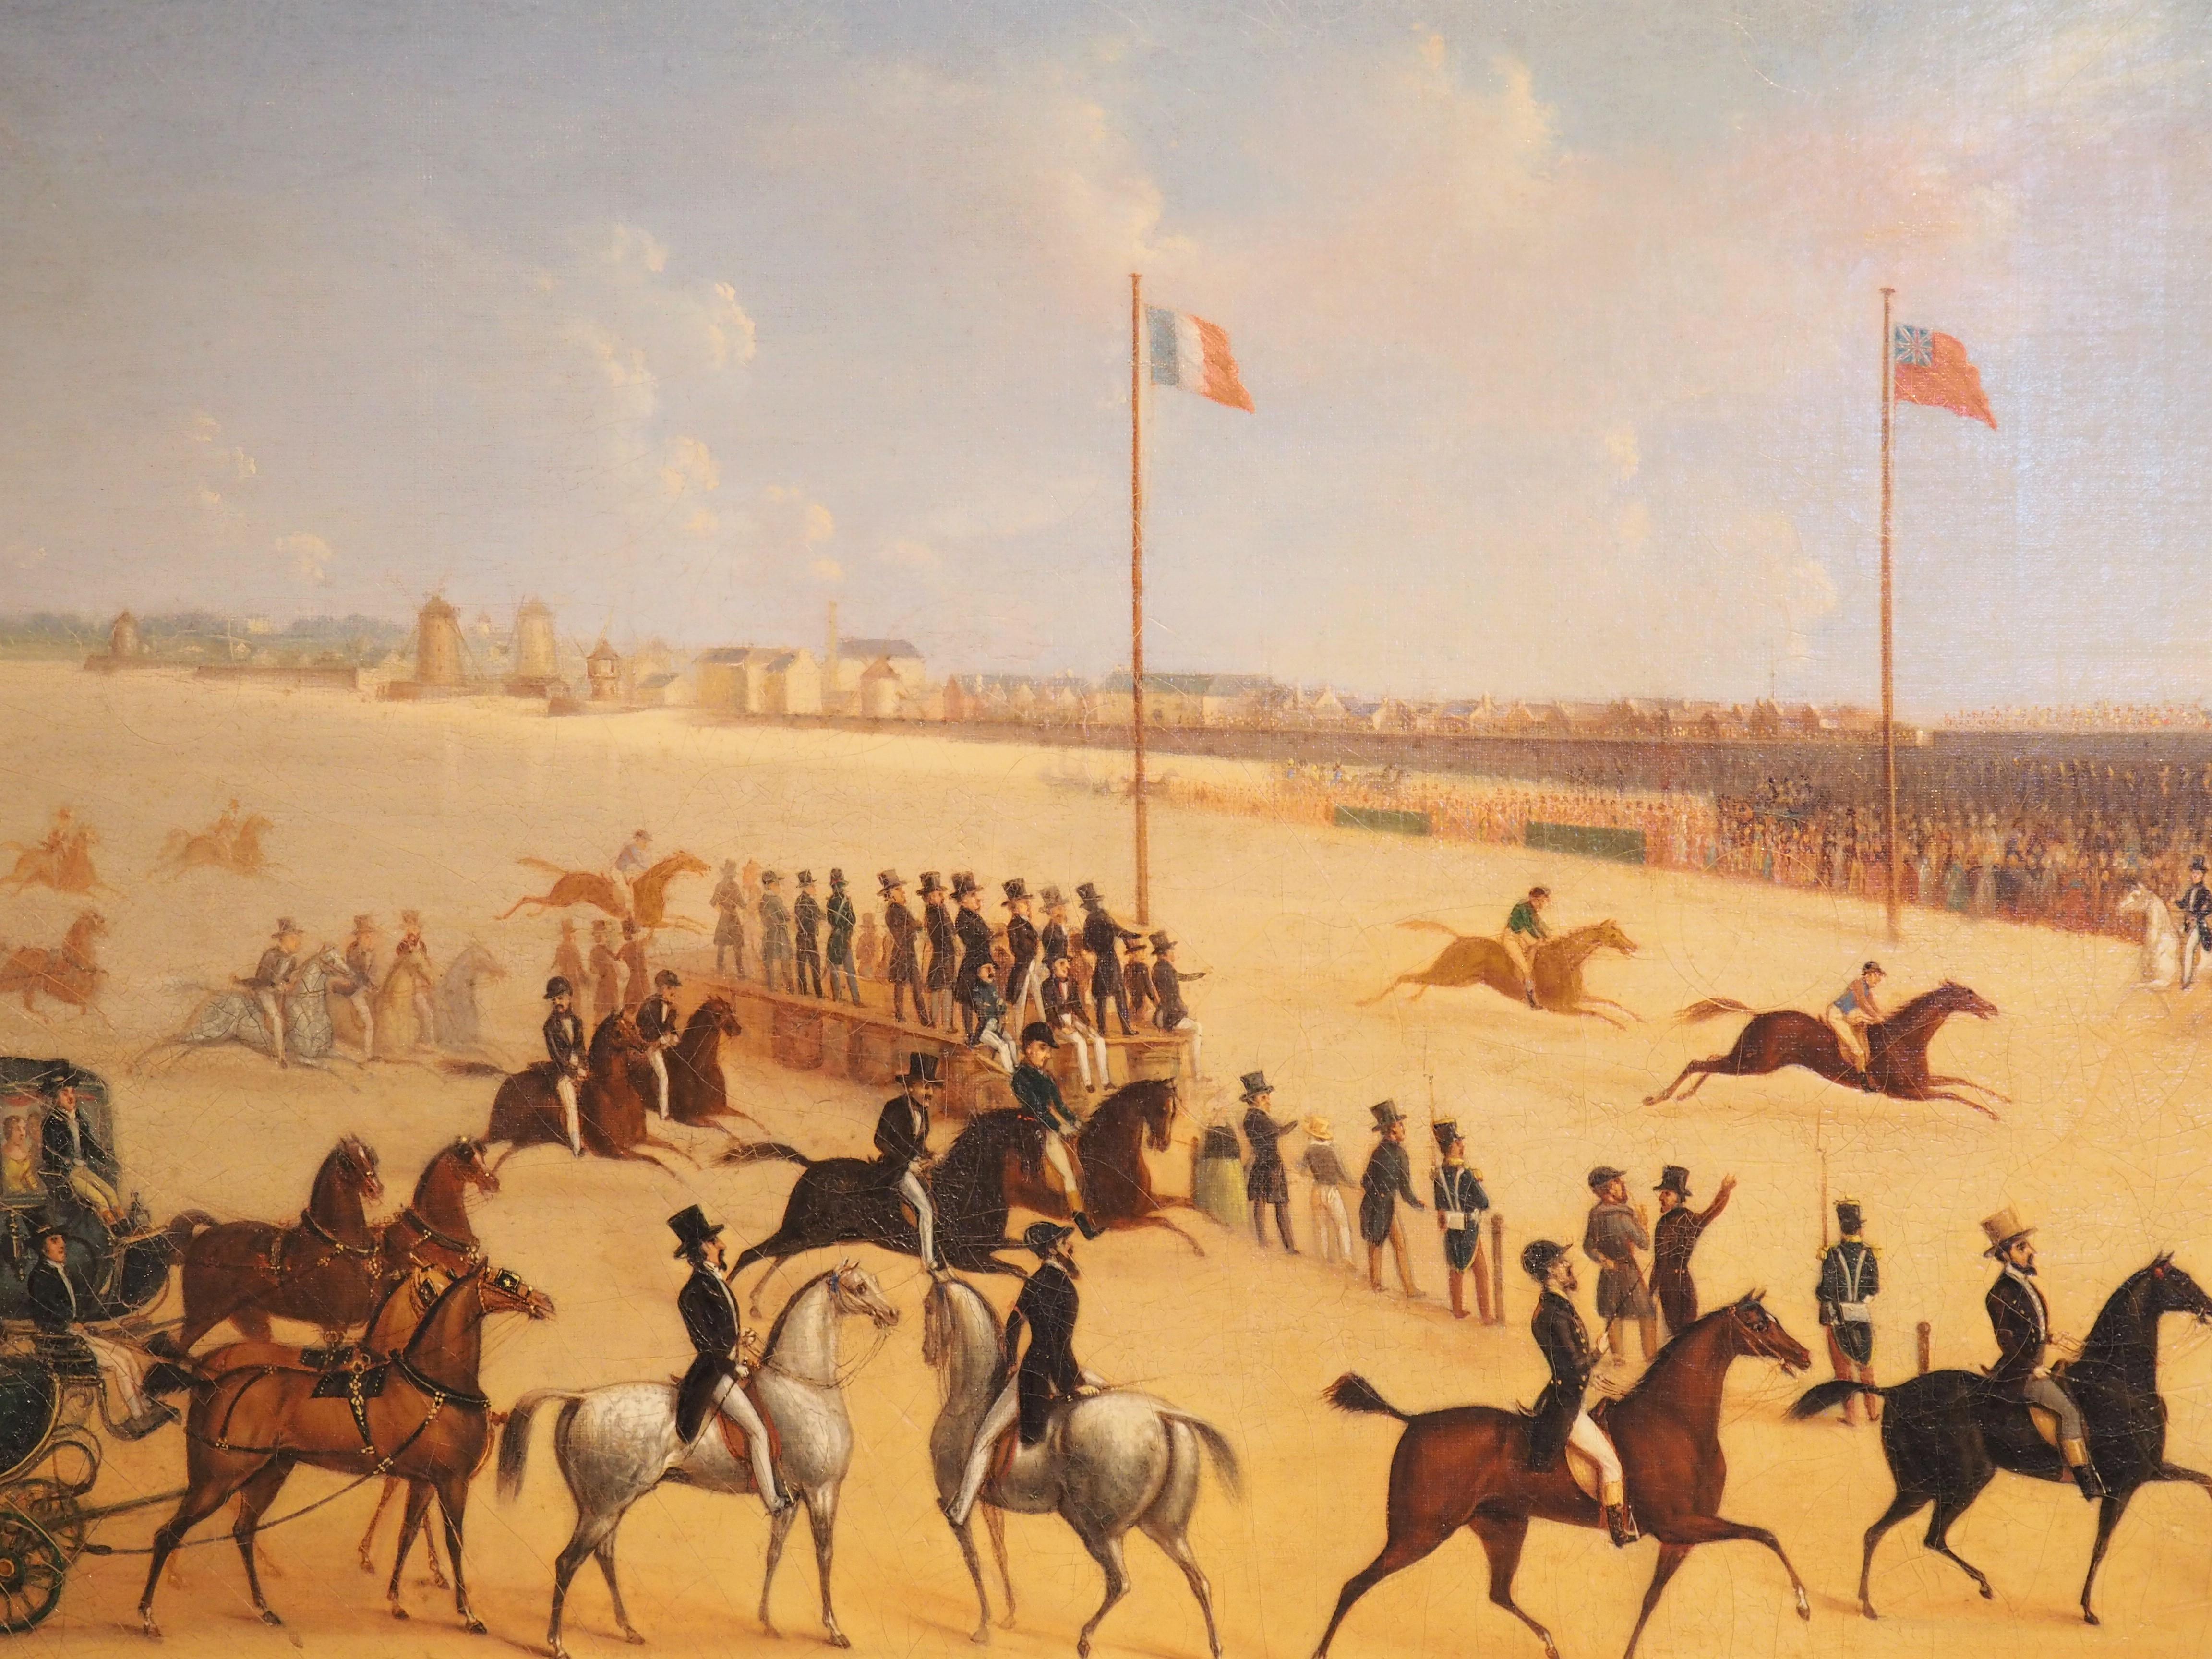 Gilt 19th Century French Oil Painting, Horse Racing on the Beaches of Saint-Malo